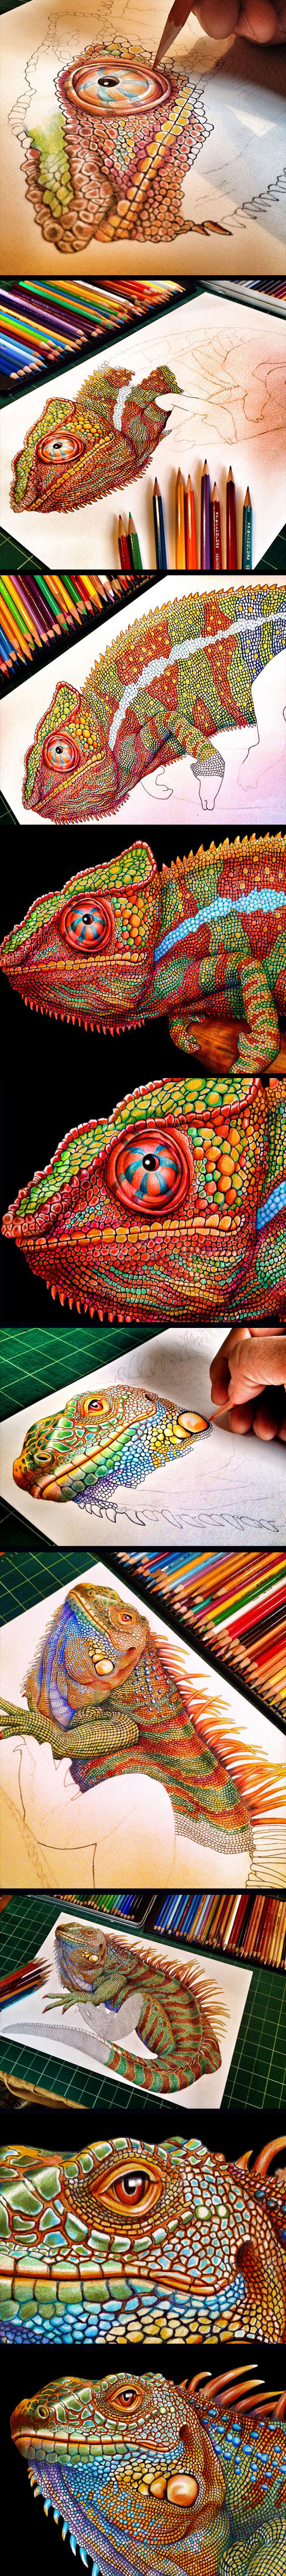 Incredibly Detailed Drawing Of A Chameleon